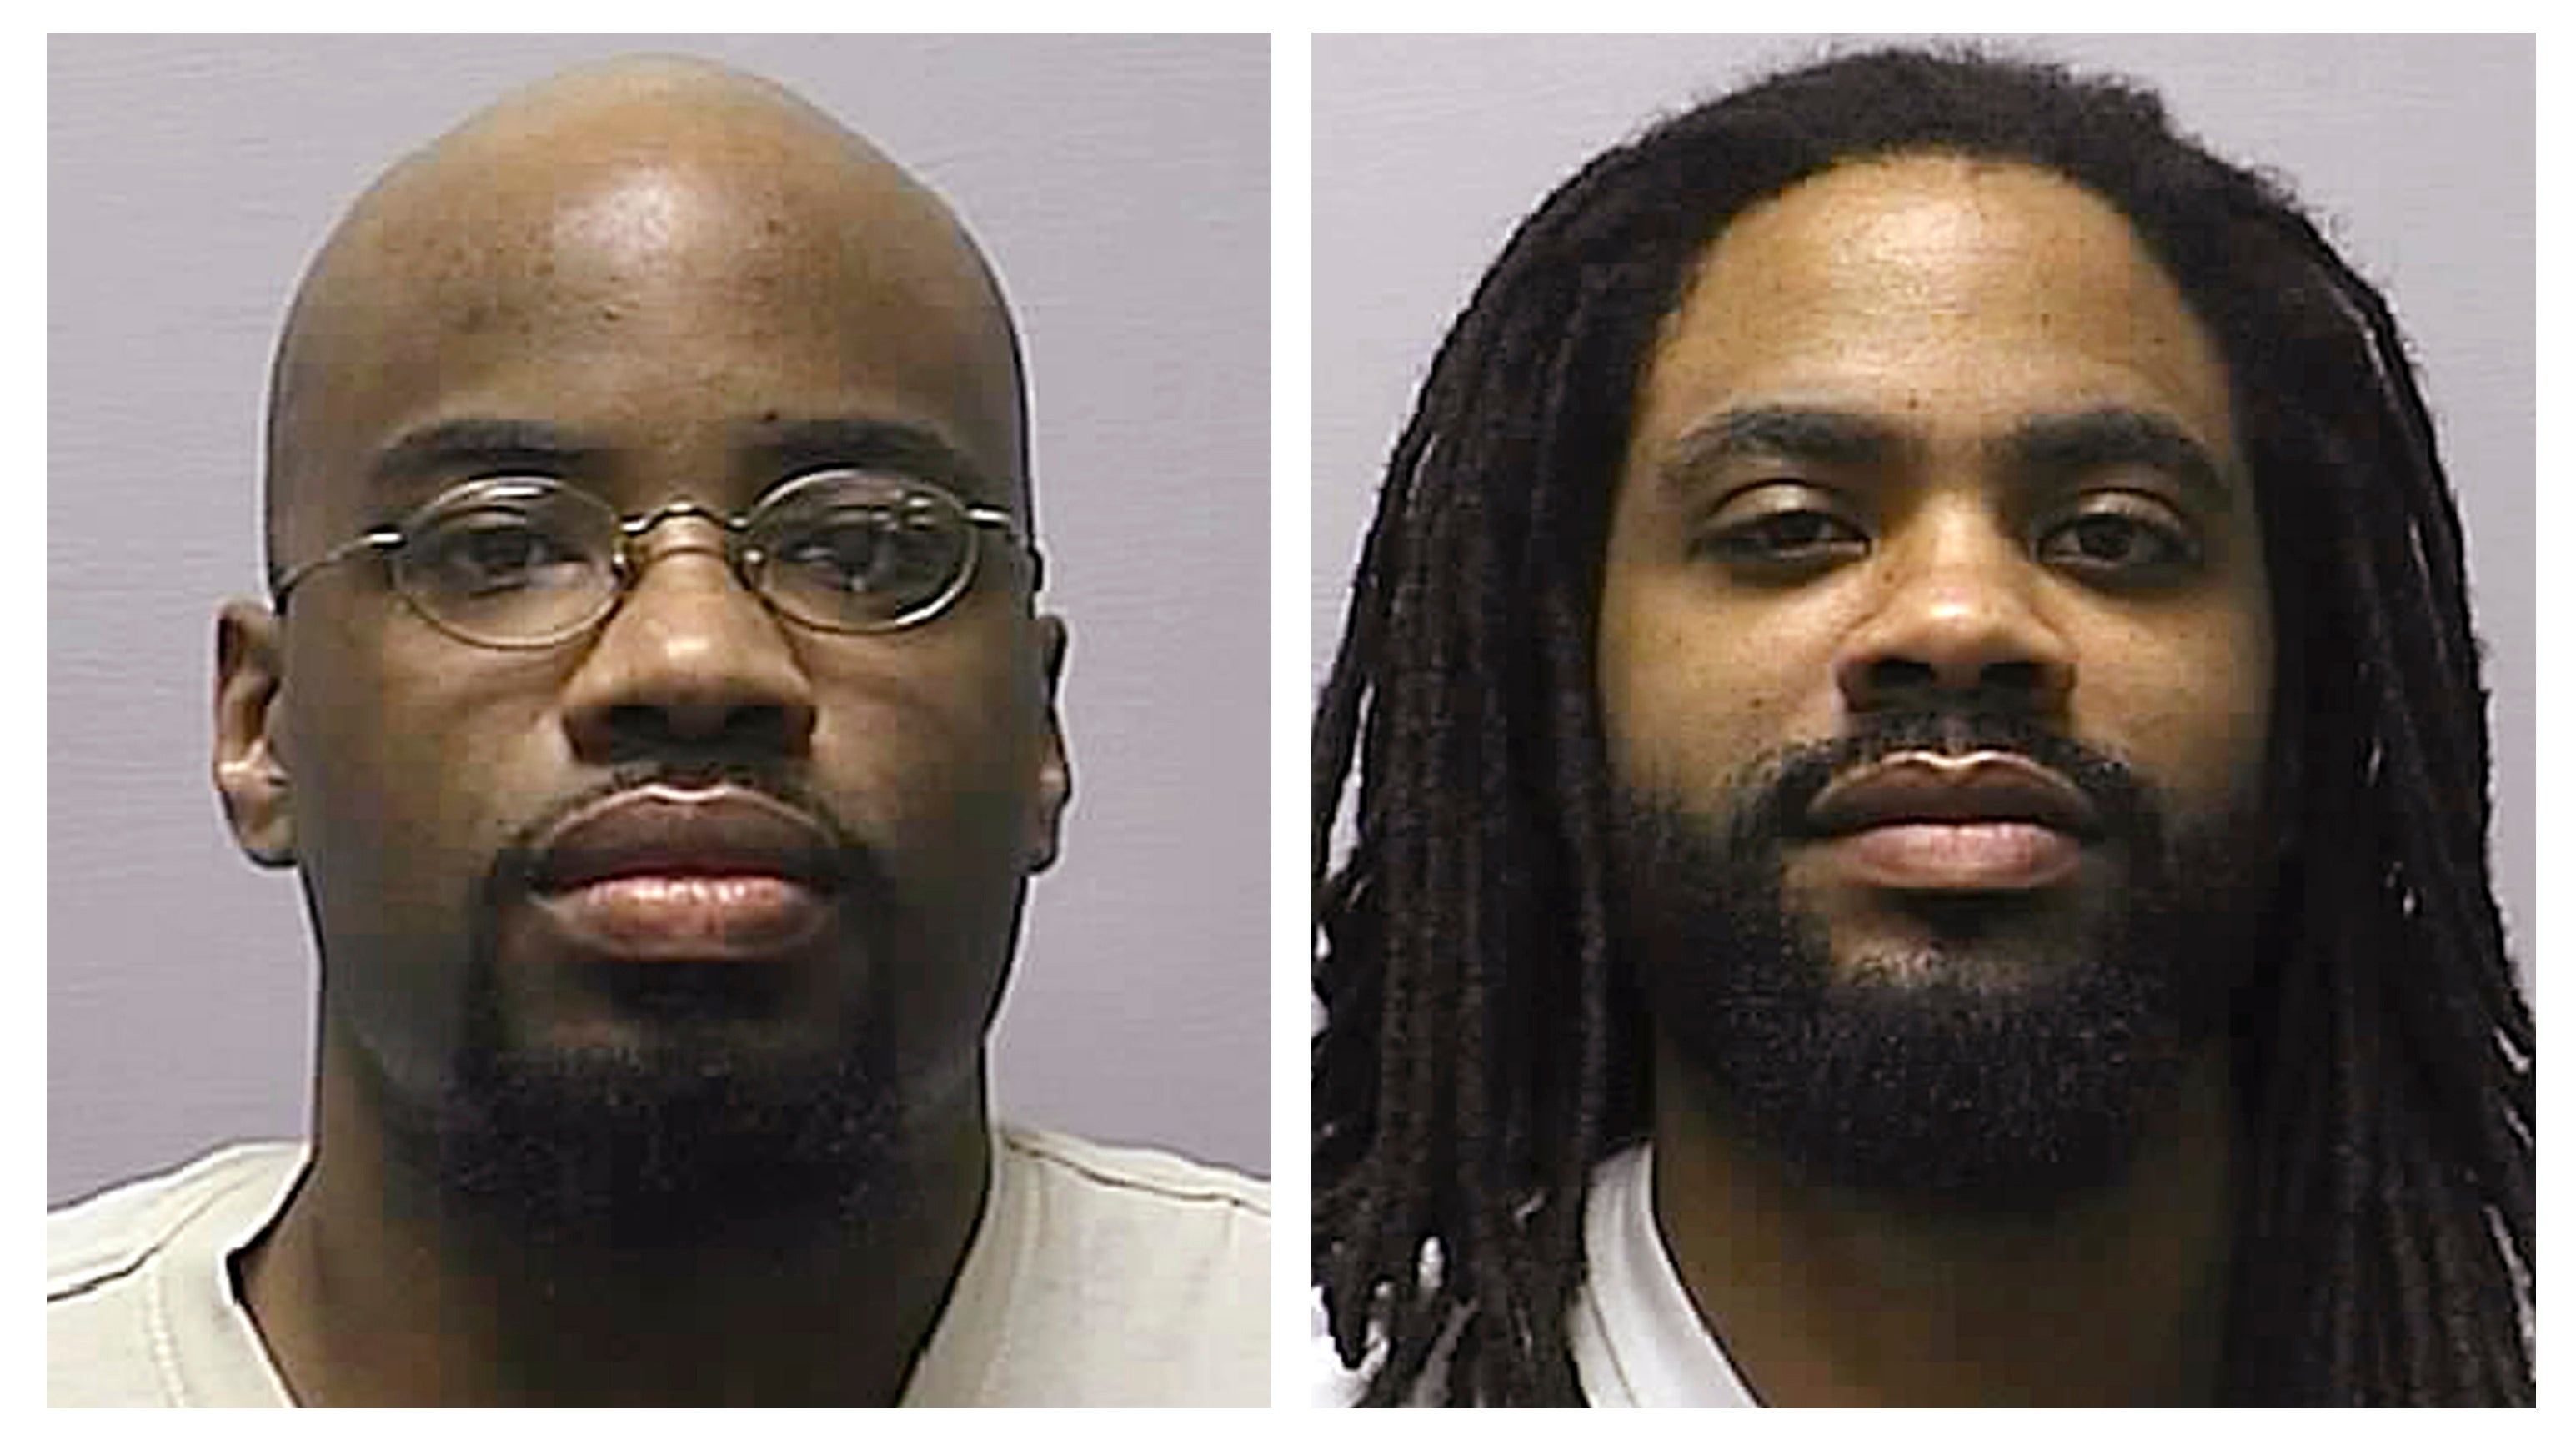 Jonathan and Reginald Carr were convicted of murder after breaking into a home on 14 December 2000, terrorizing five people and shooting them execution-style